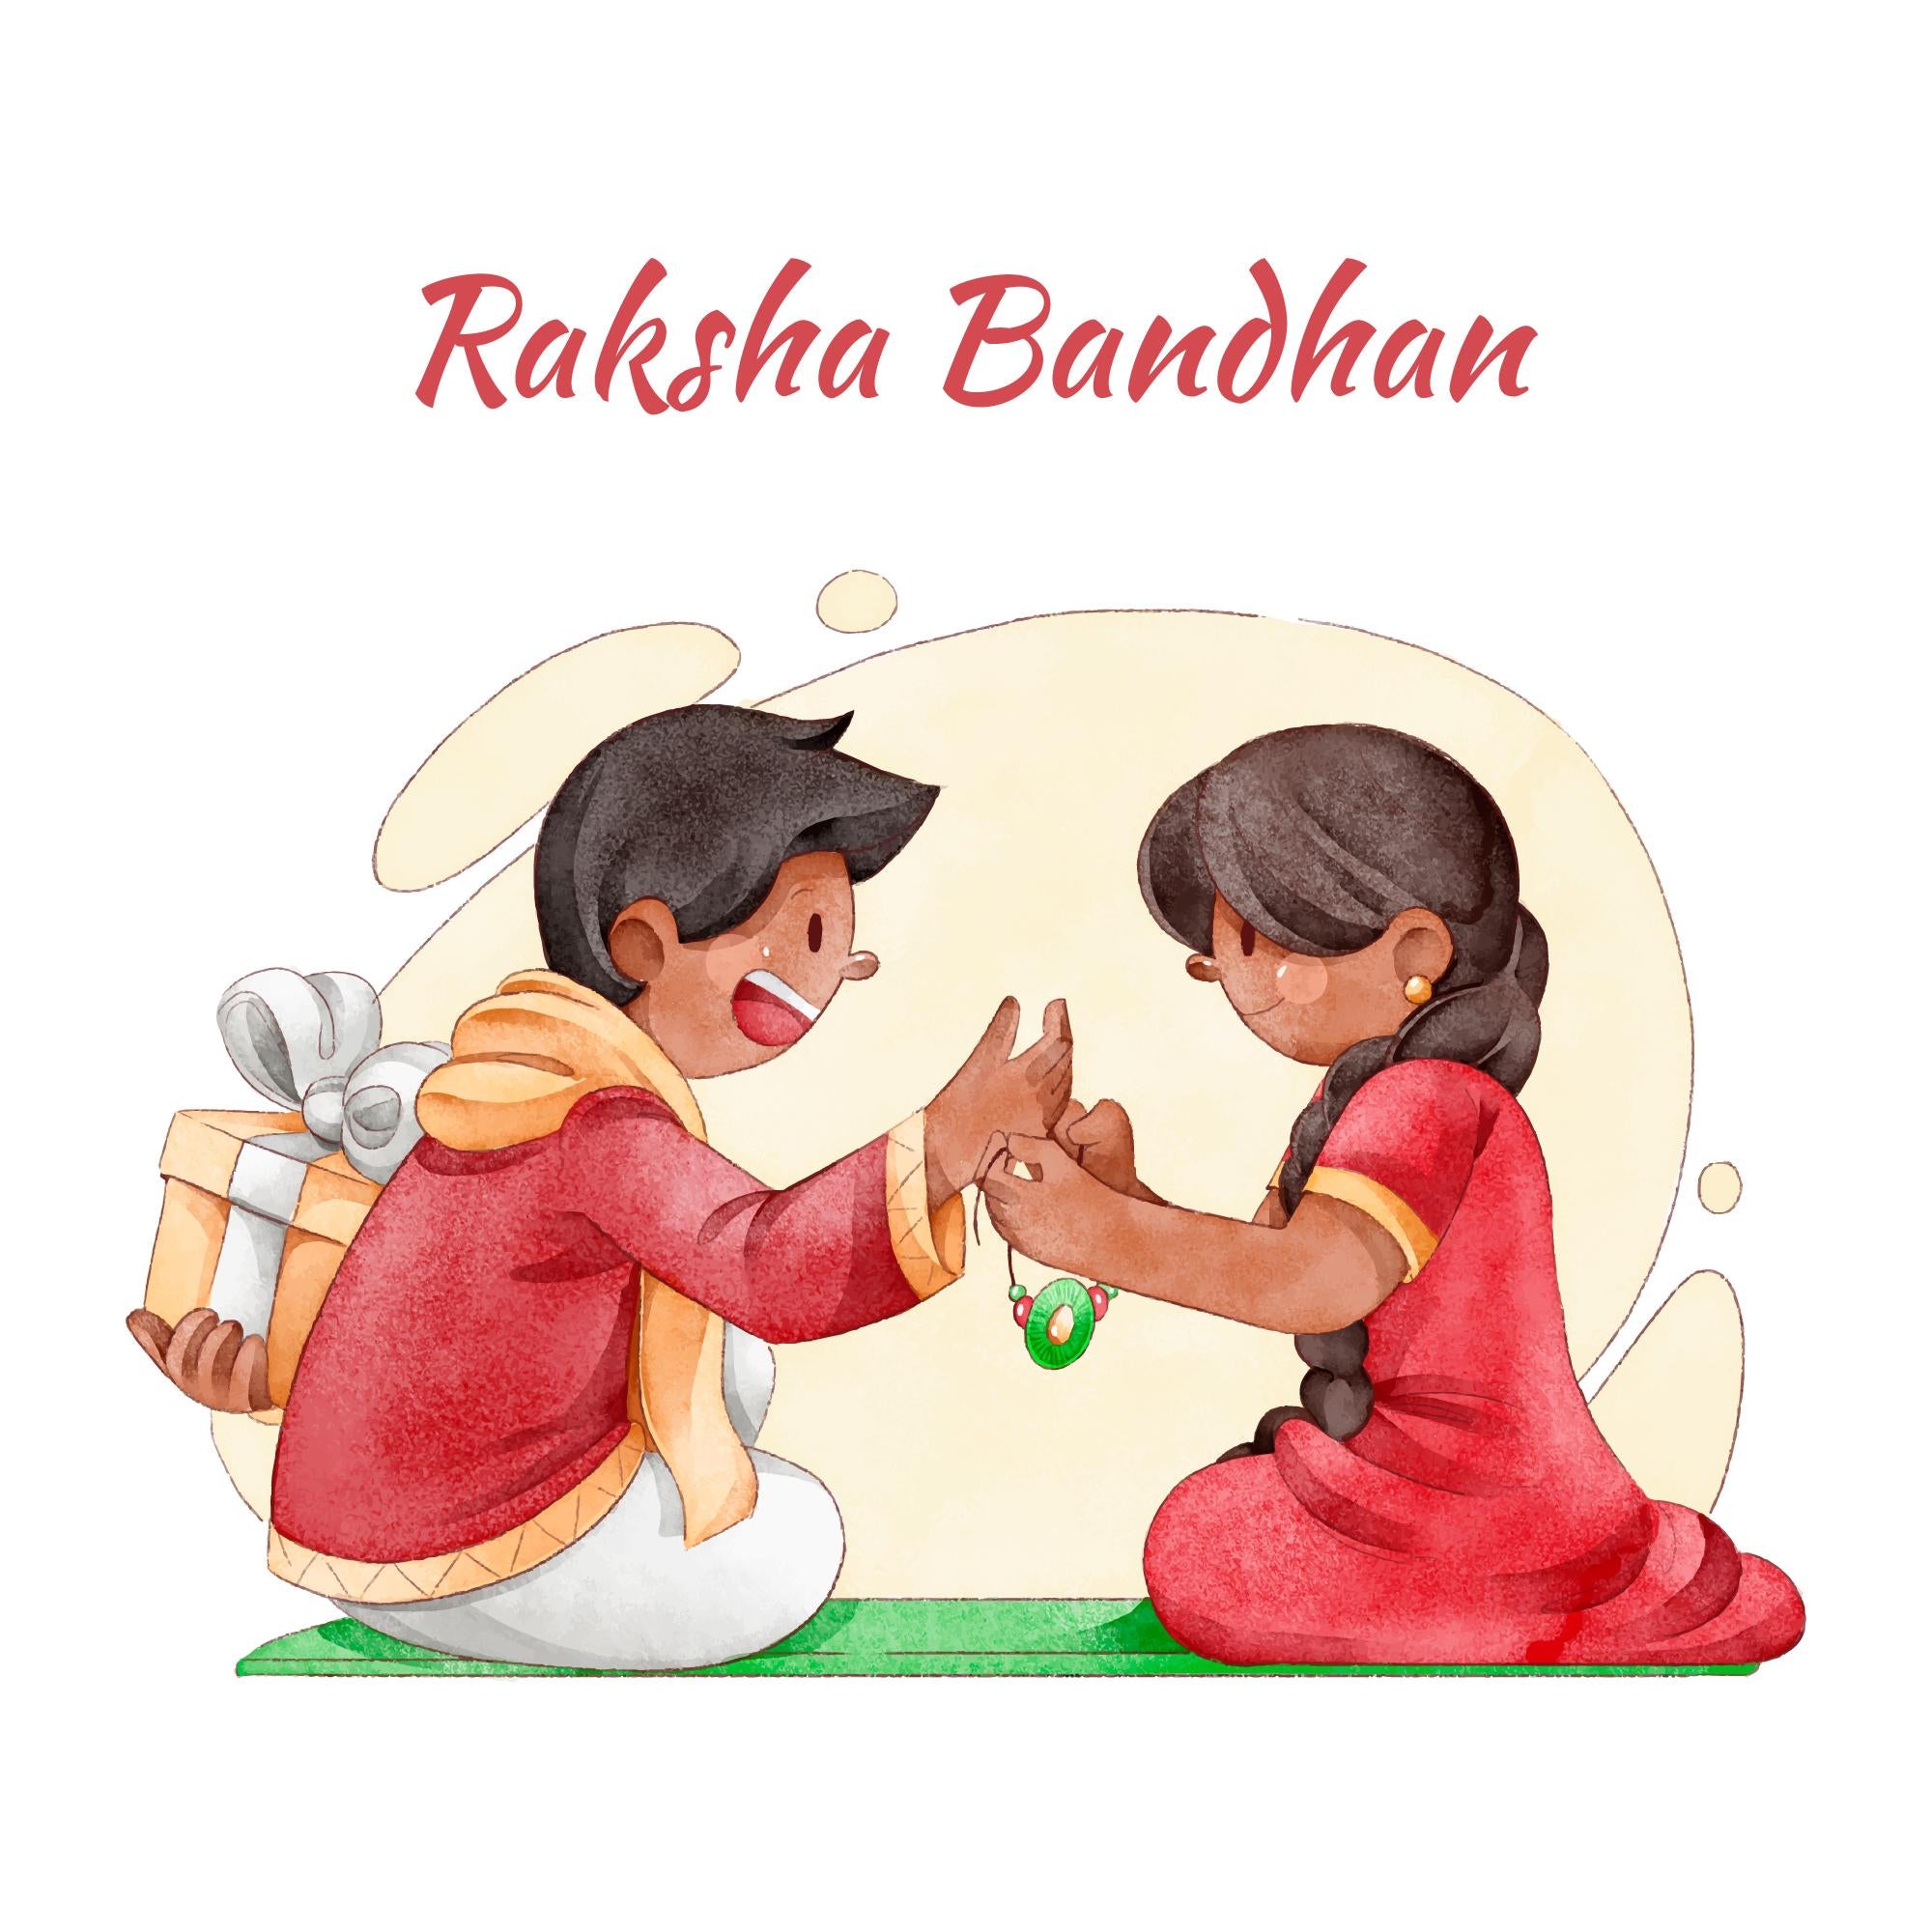 What would be the best gift for a younger sister on Raksha Bandhan? - Quora